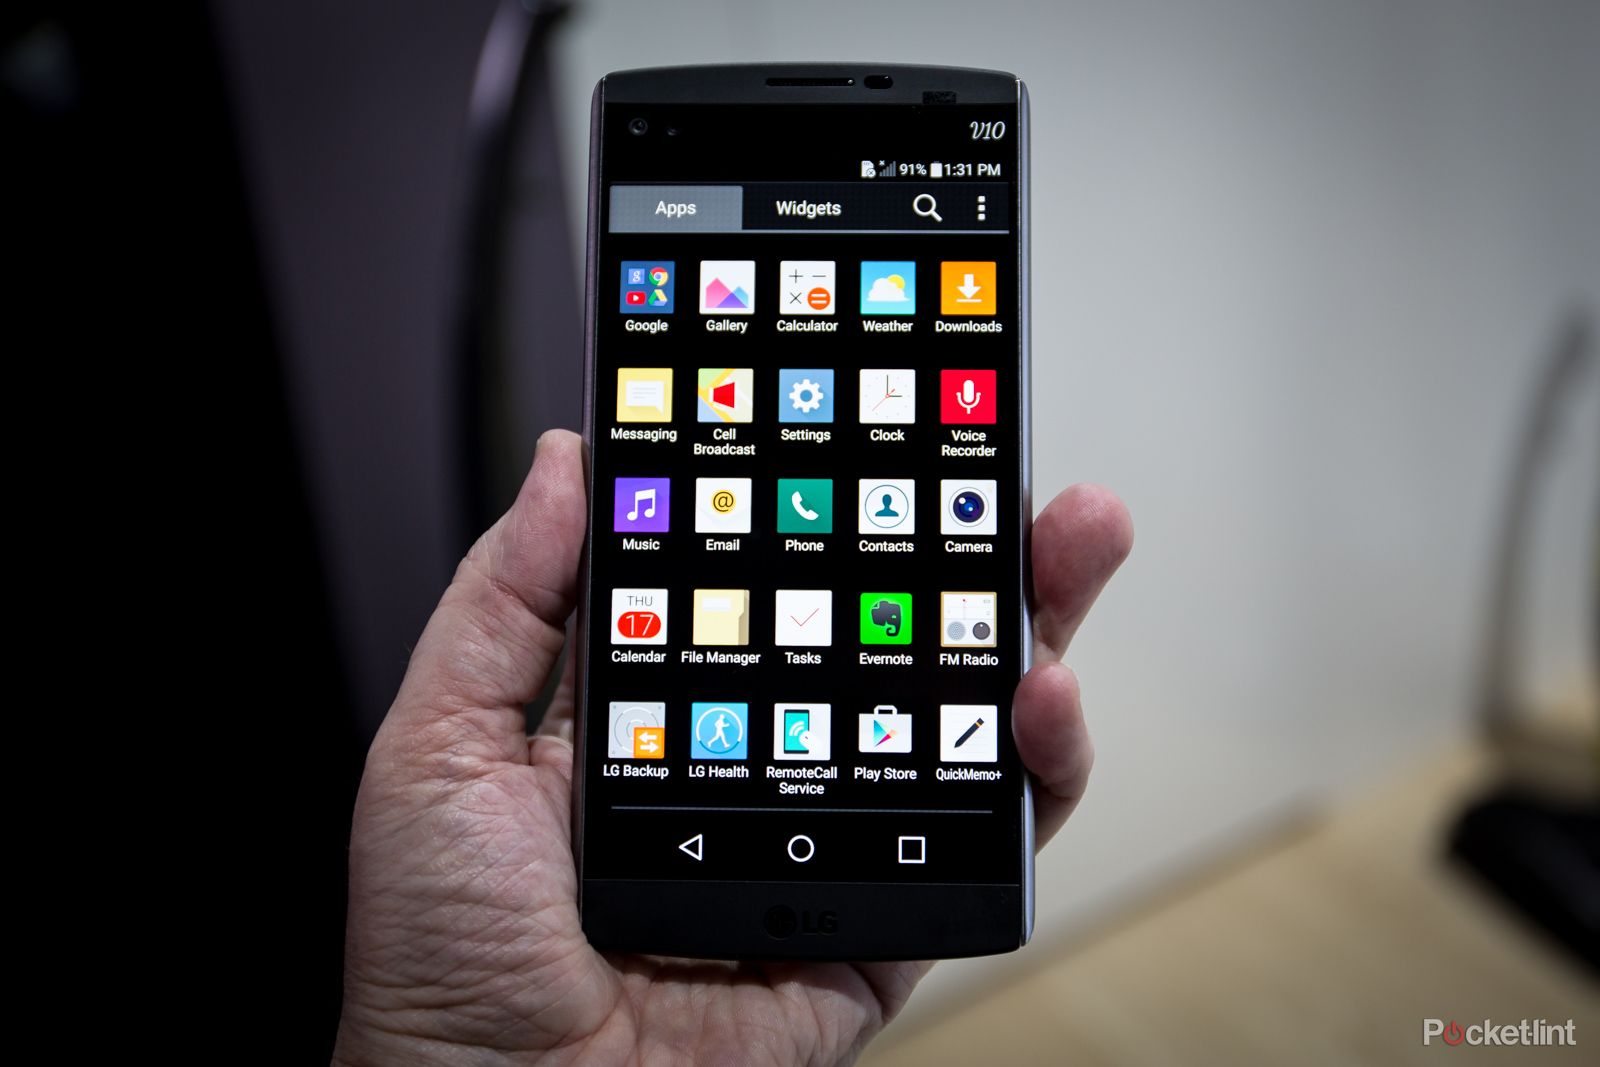 LG V10 smartphone coming to the UK: Here are our first impressions